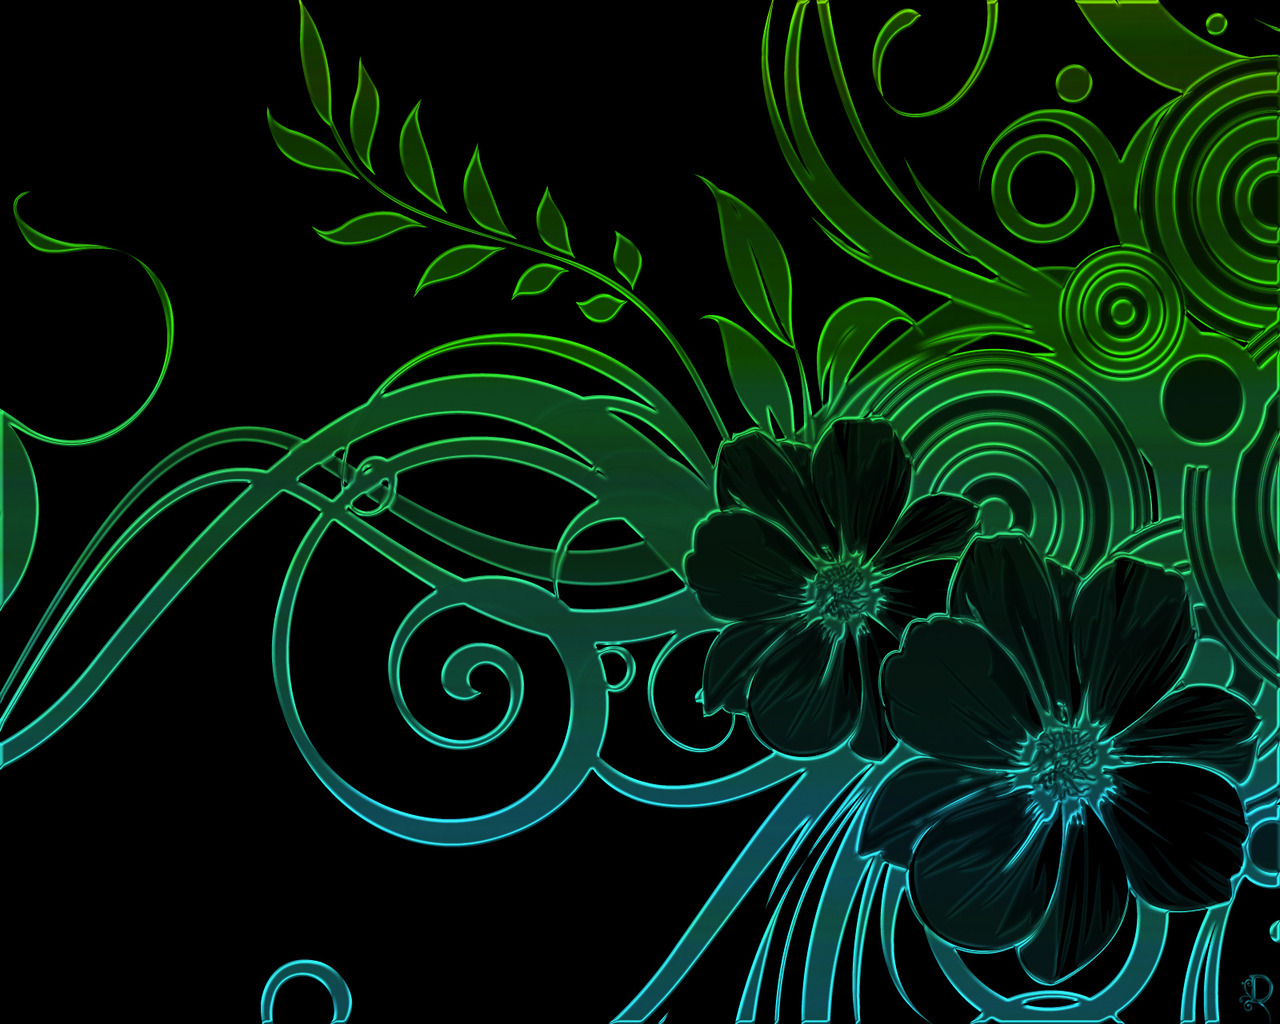 To Abstract Flowers Wallpaper Click On Full Size And Then